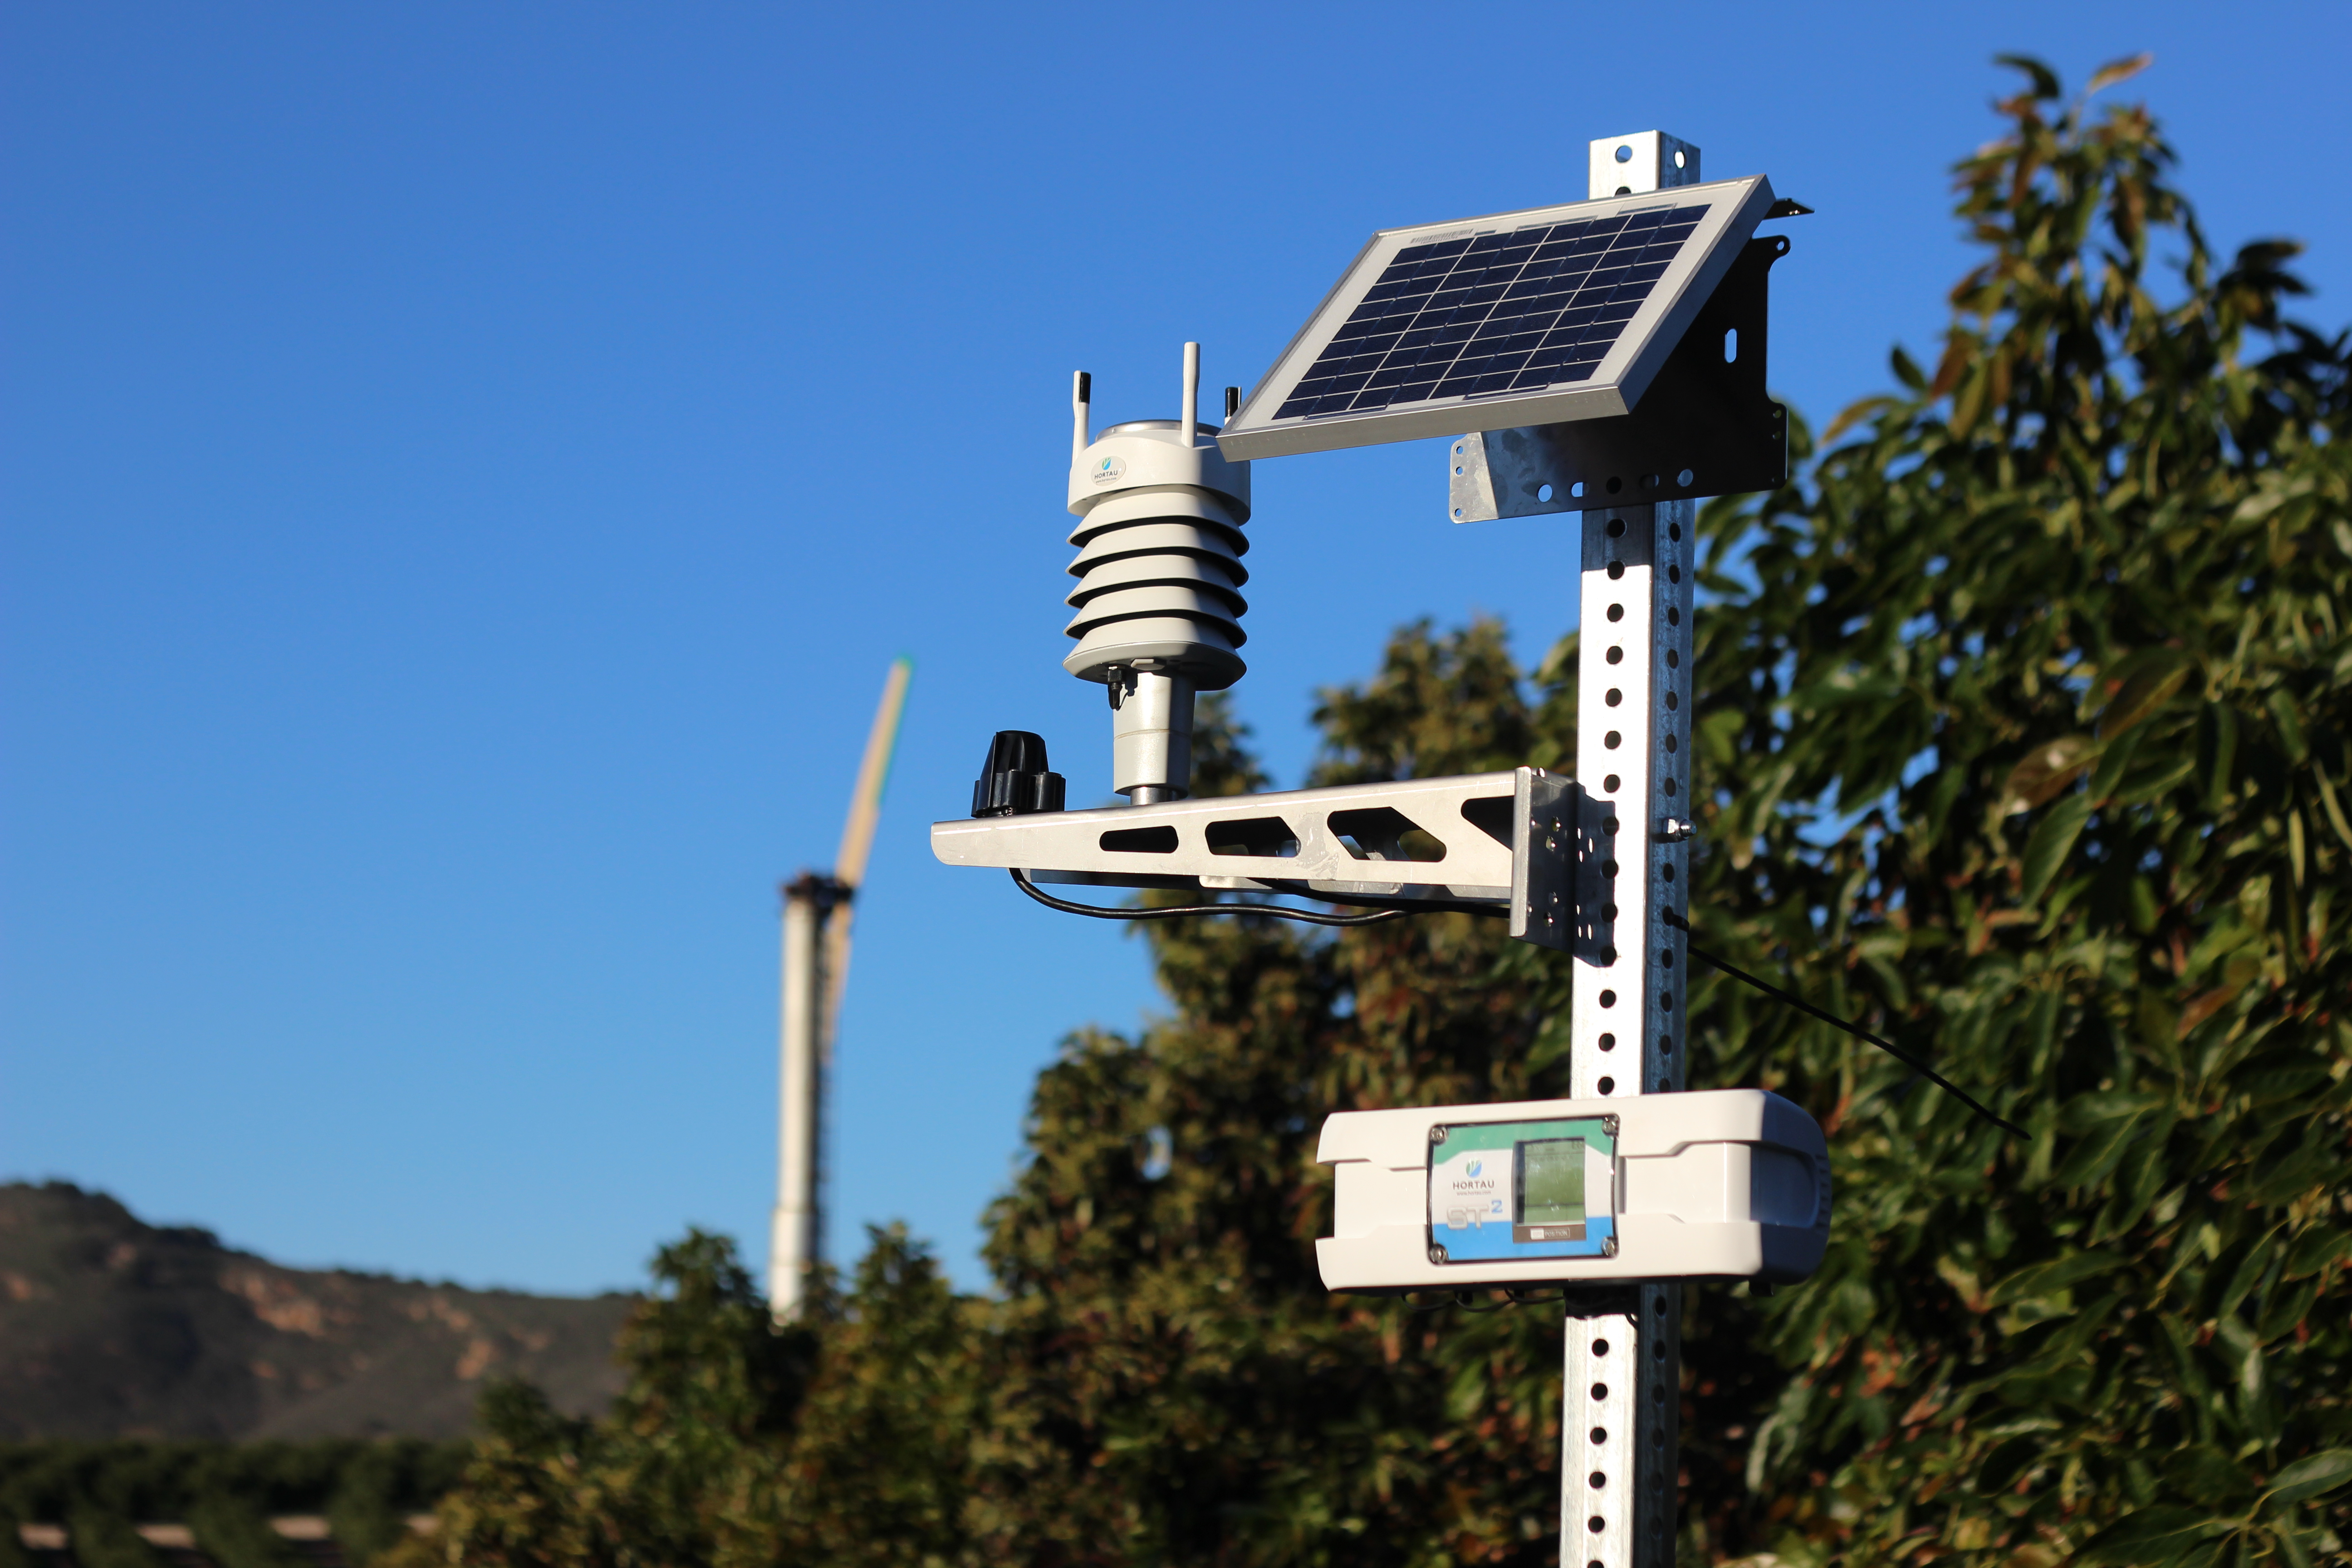 solar-powered-weather-station-fan-jets-in-background